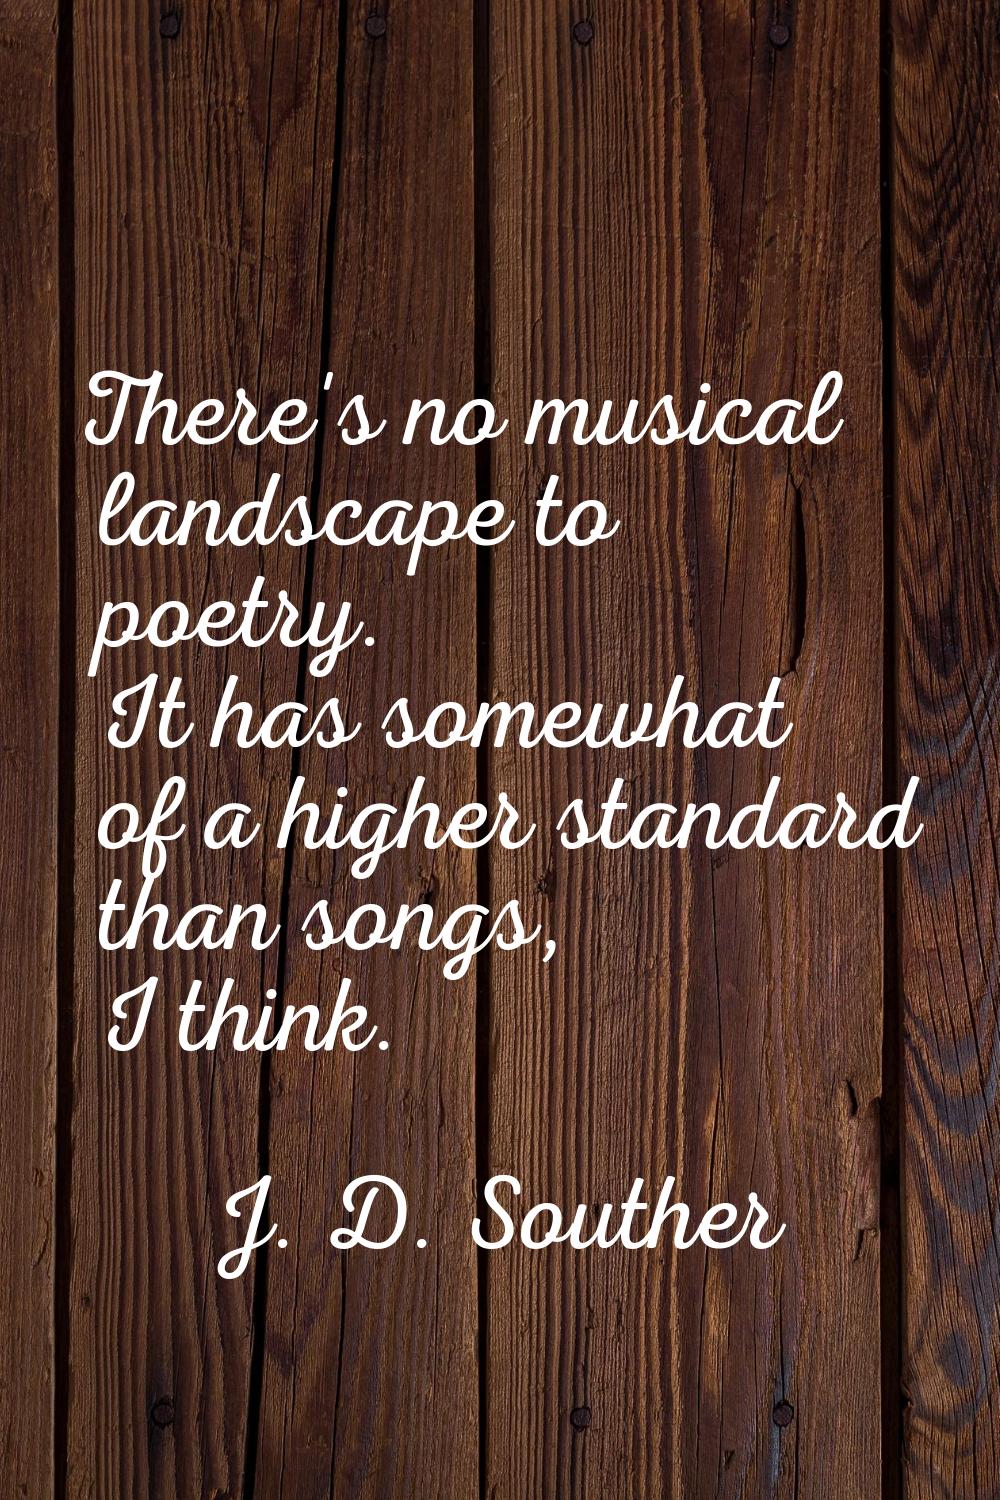 There's no musical landscape to poetry. It has somewhat of a higher standard than songs, I think.